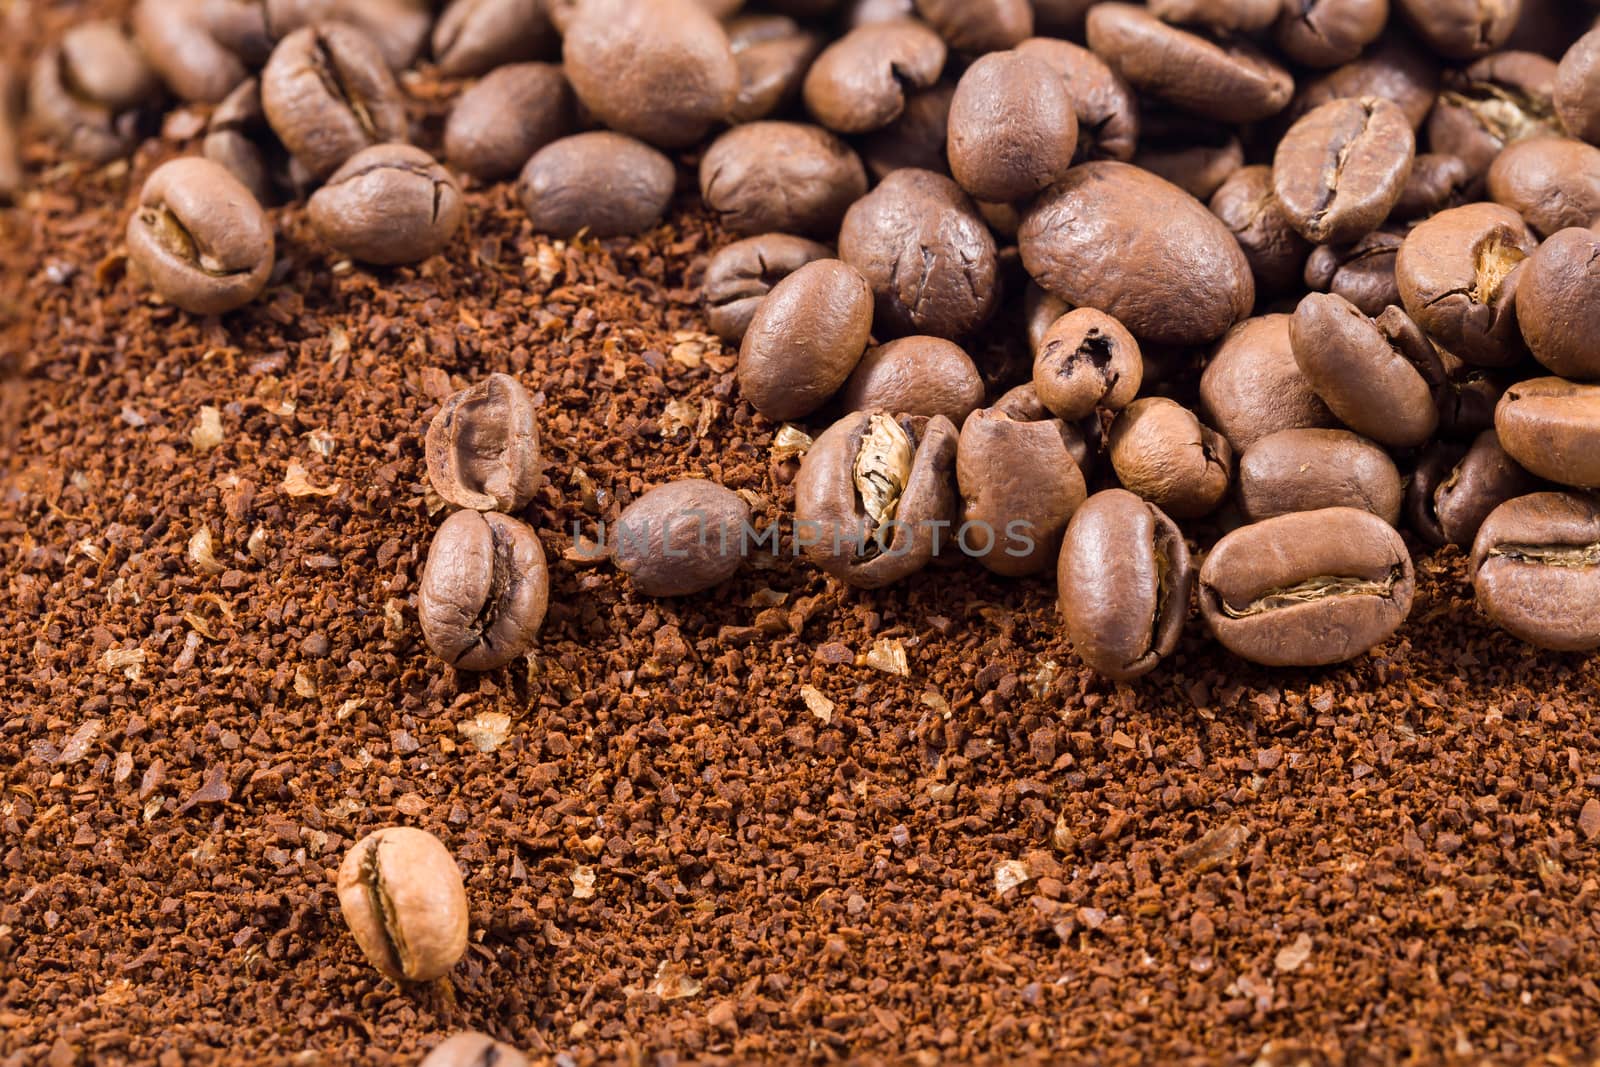 Picture of a group of coffee beans with coffee powder